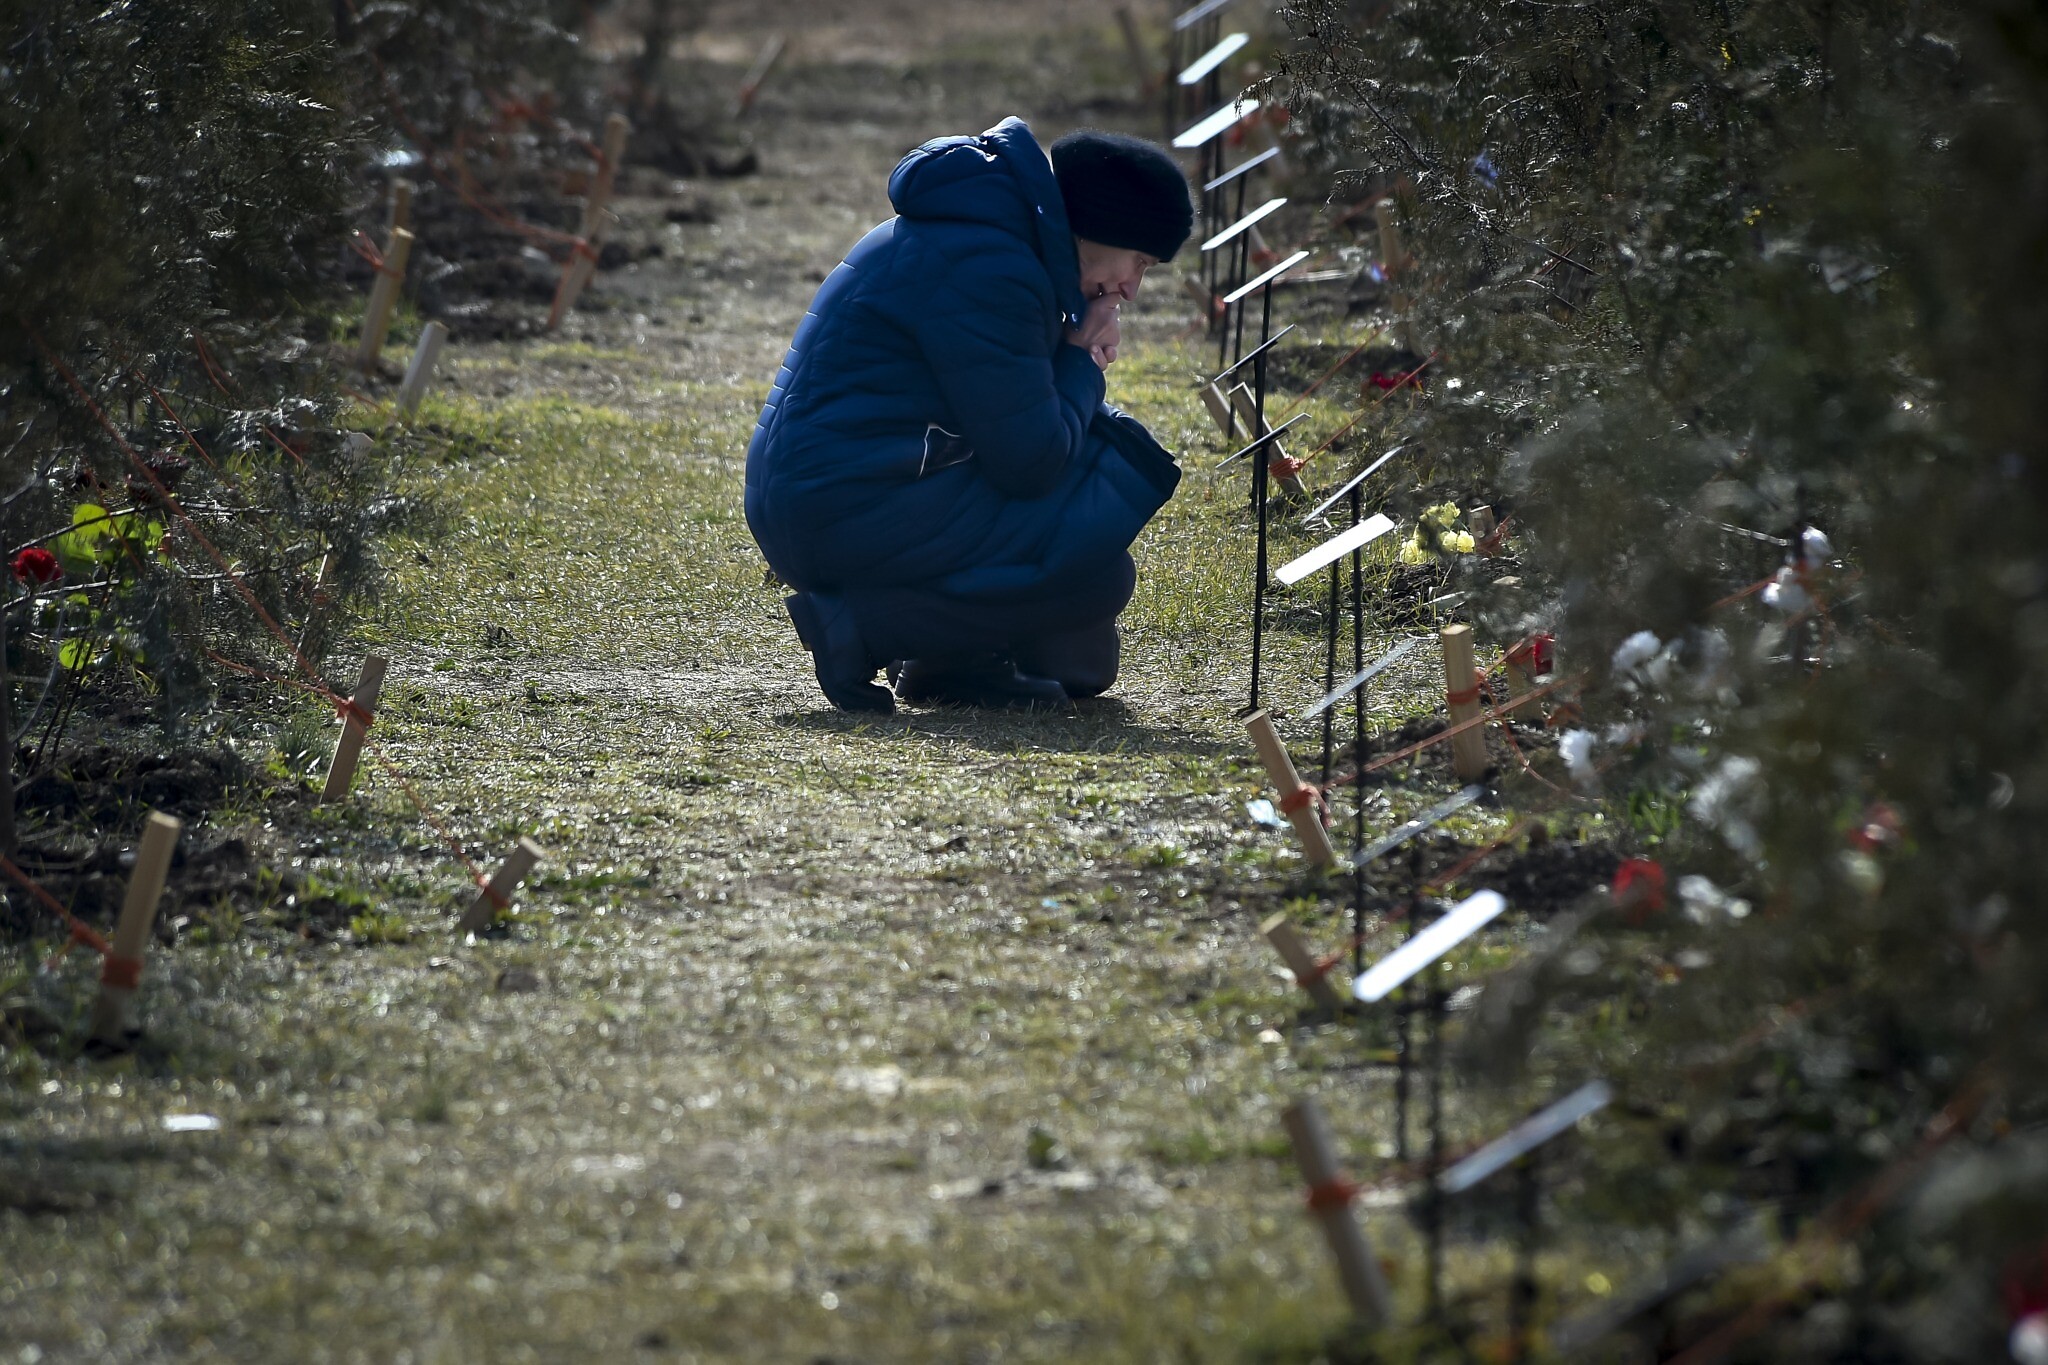 Independent analysis estimates 50,000 Russians have died in Ukraine war The Times of Israel